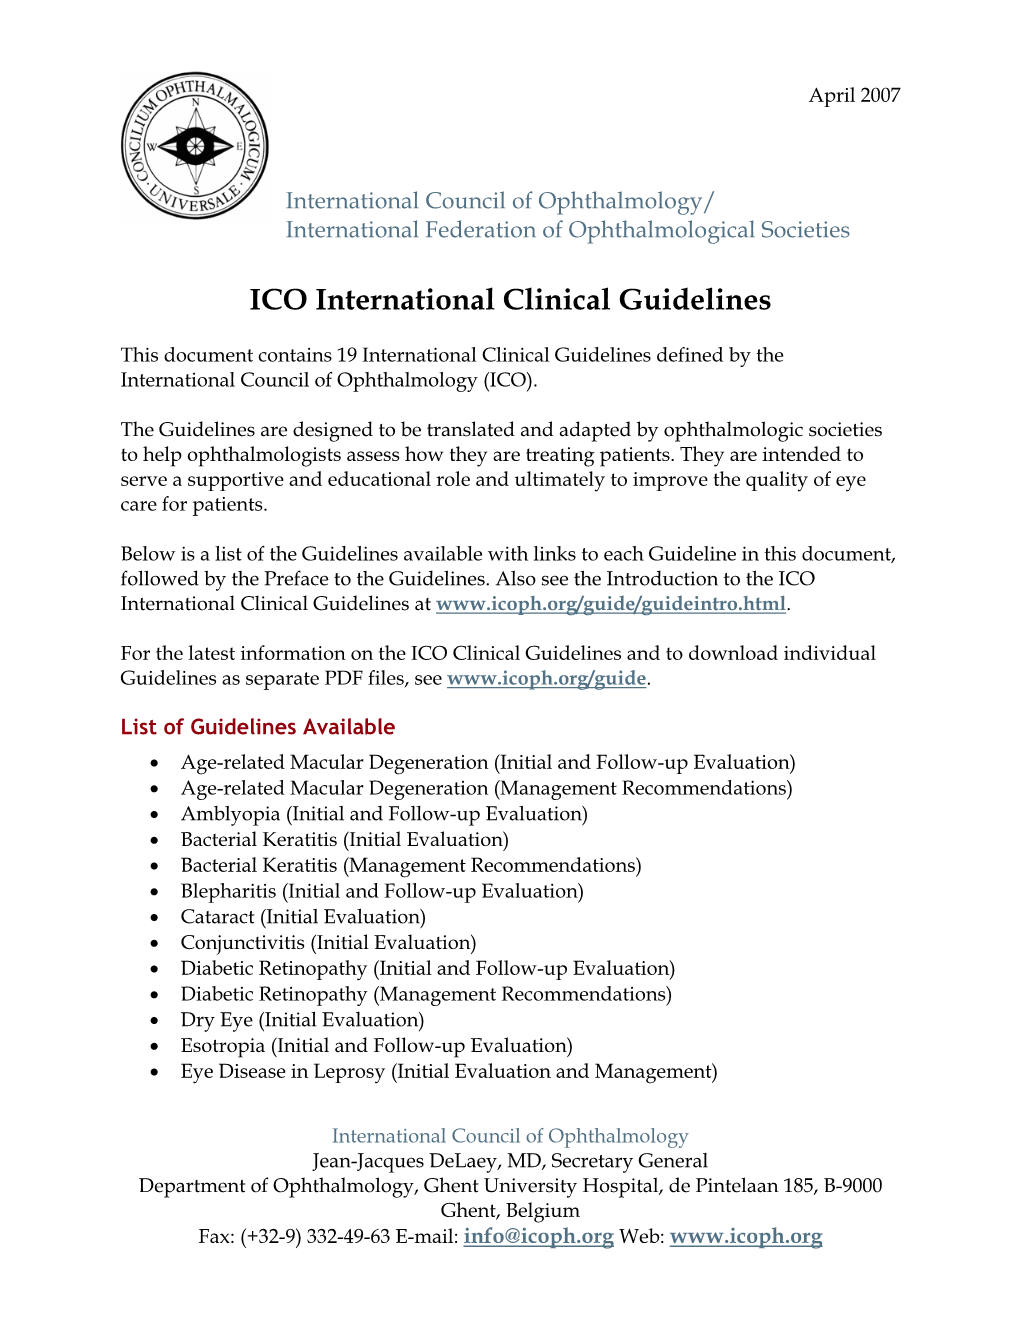 ICO International Clinical Guidelines